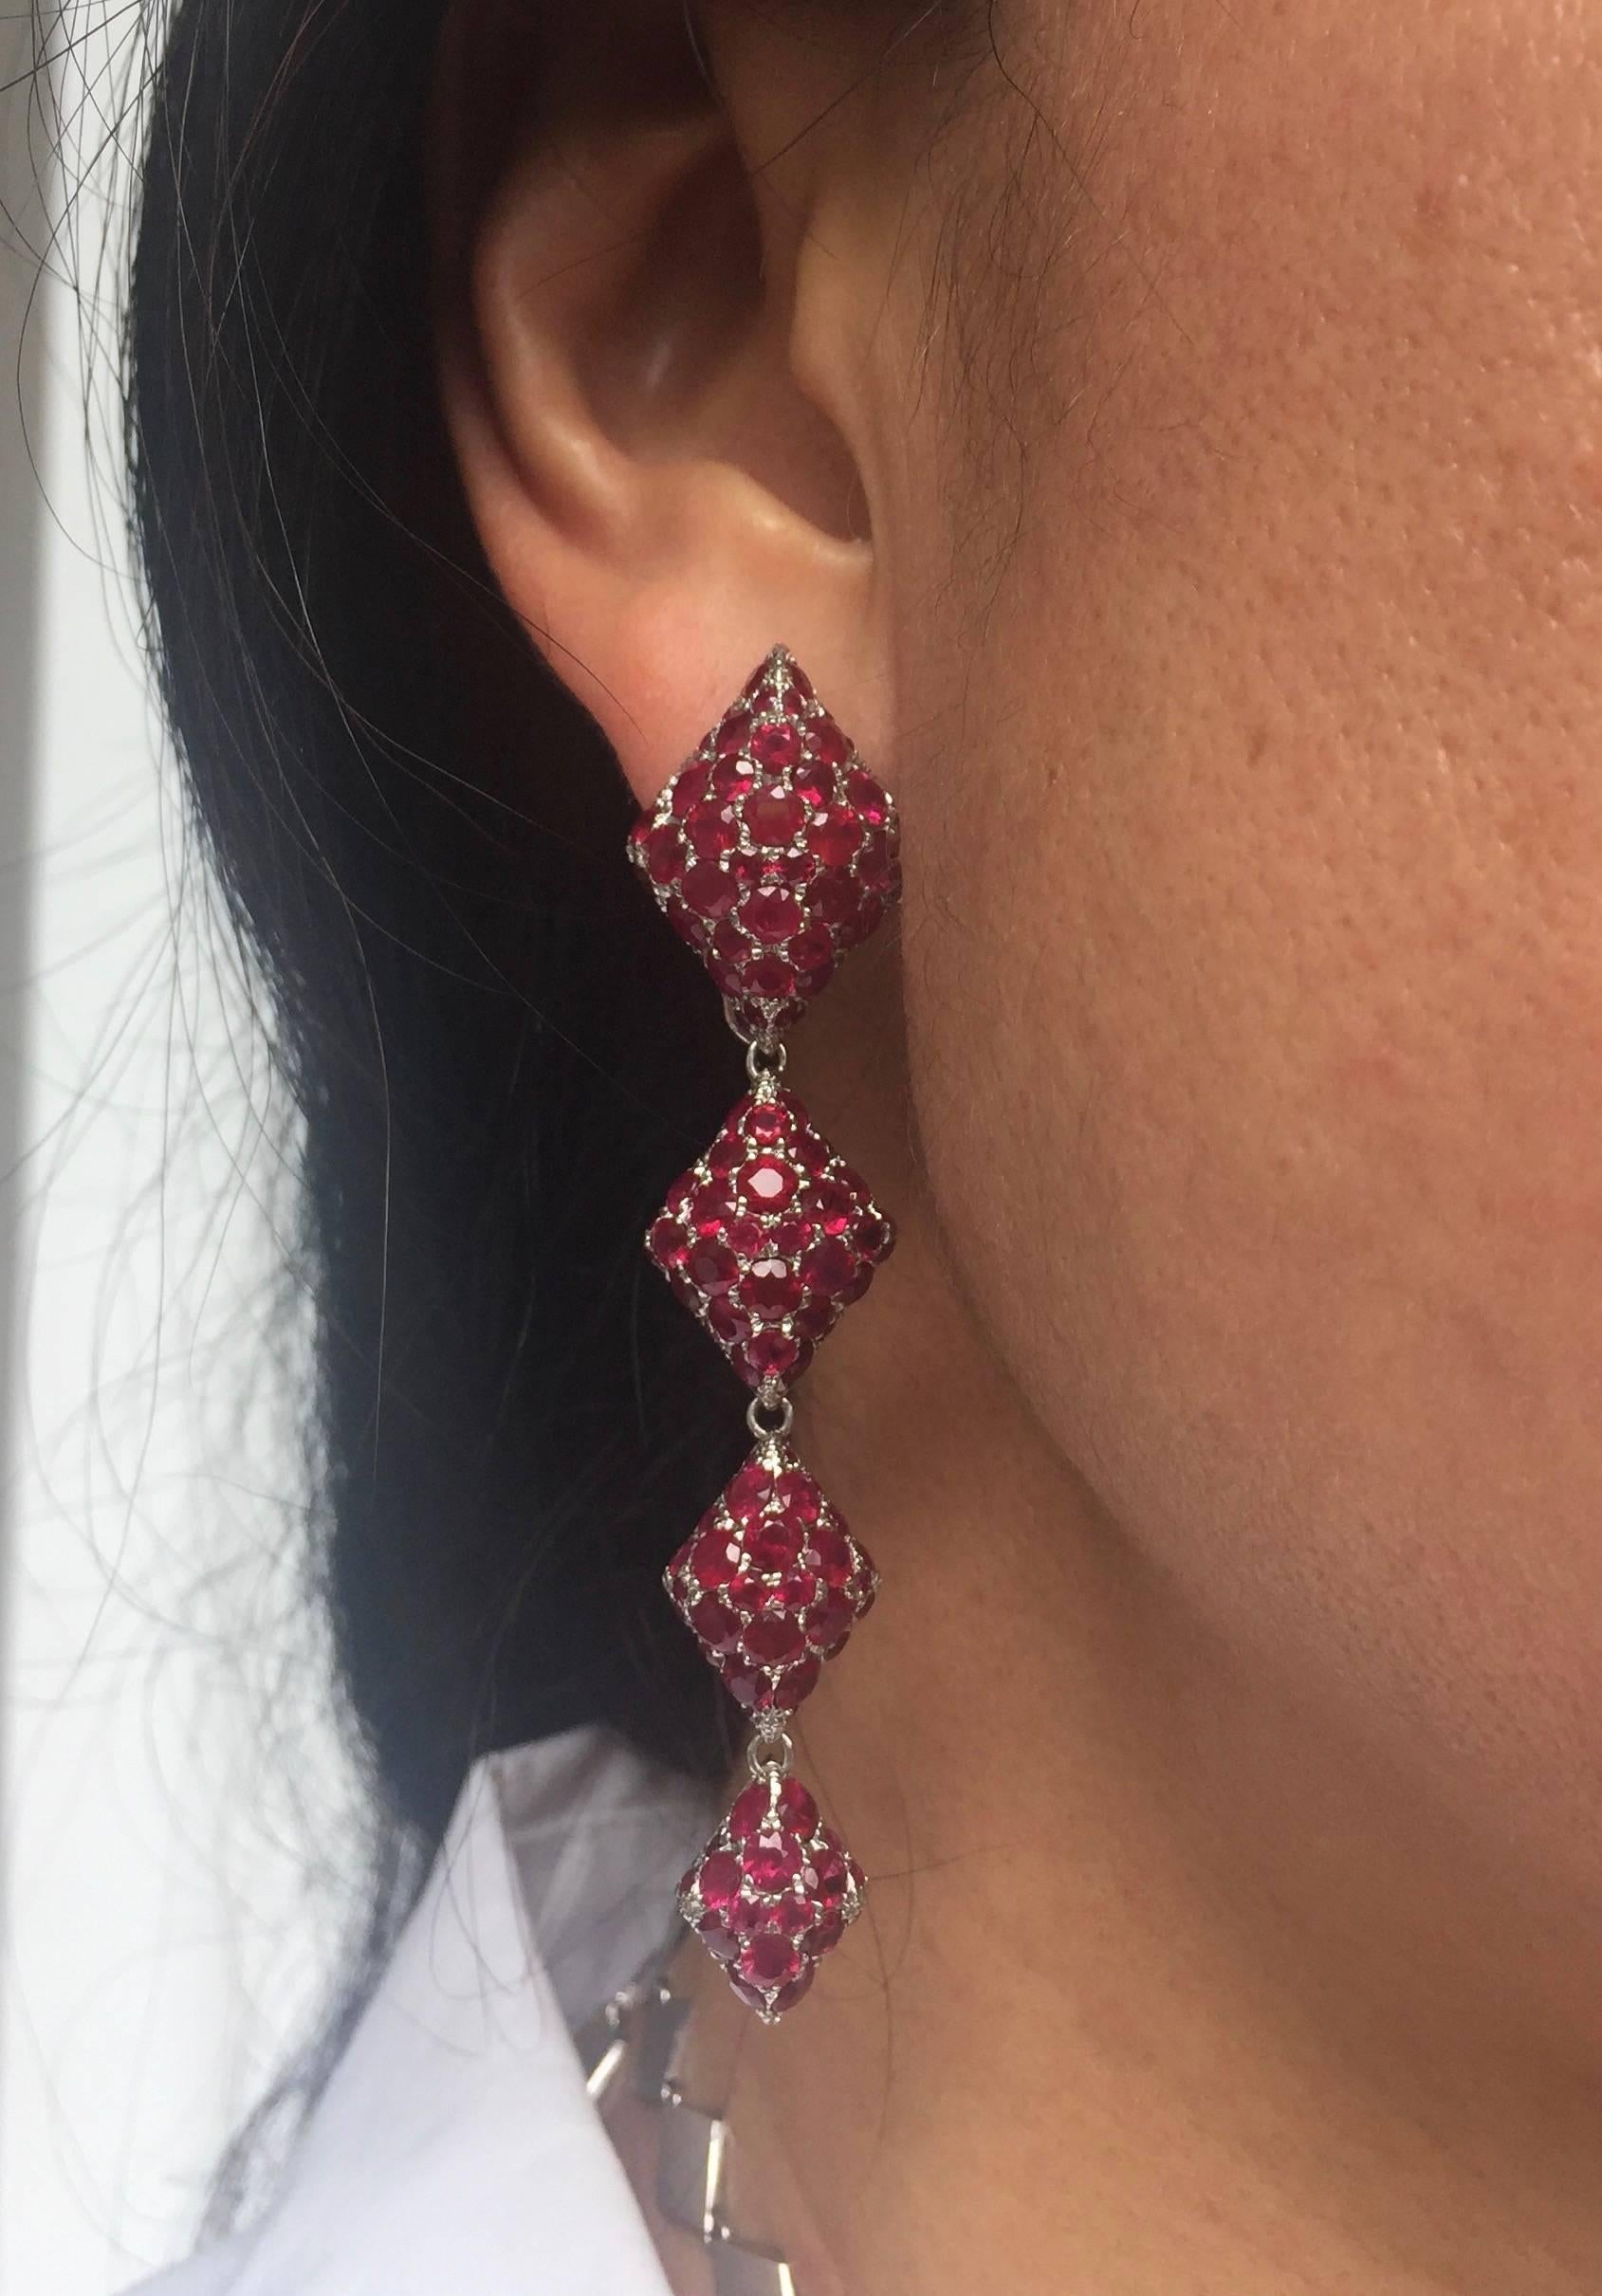 Metal: 18K White Gold  
Precious Stones: Rubies (approximately 20cts) 
Please allow for slight variations in measurements as pieces are handmade.

Youmna's 18K White Gold and Rubies Harlequin Earrings is set with nearly 20 carats of rubies,